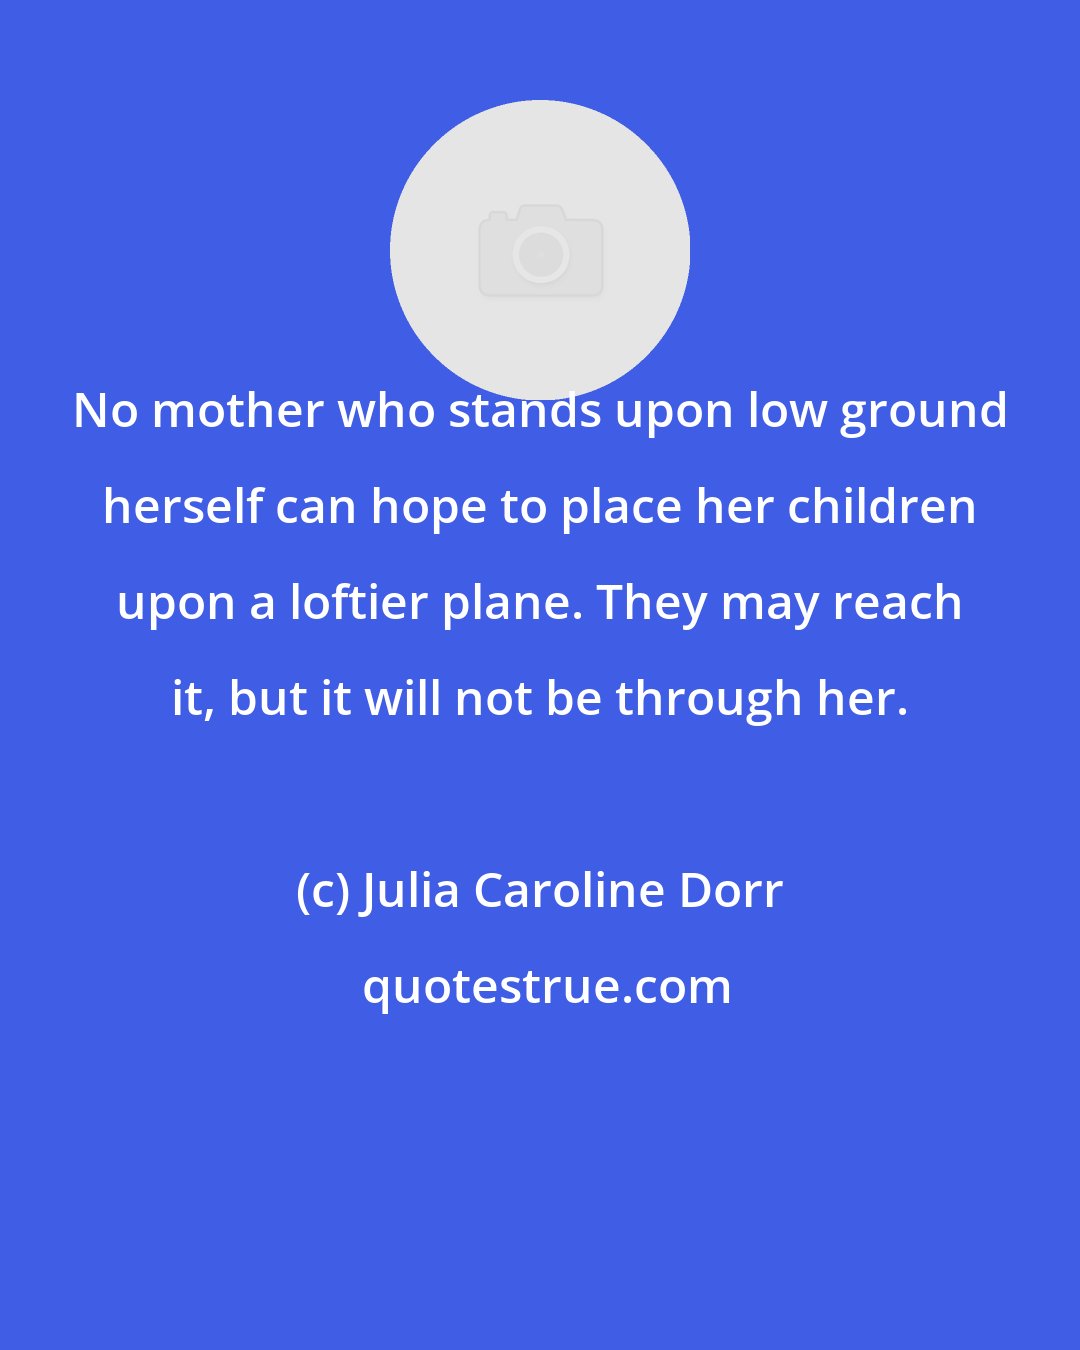 Julia Caroline Dorr: No mother who stands upon low ground herself can hope to place her children upon a loftier plane. They may reach it, but it will not be through her.